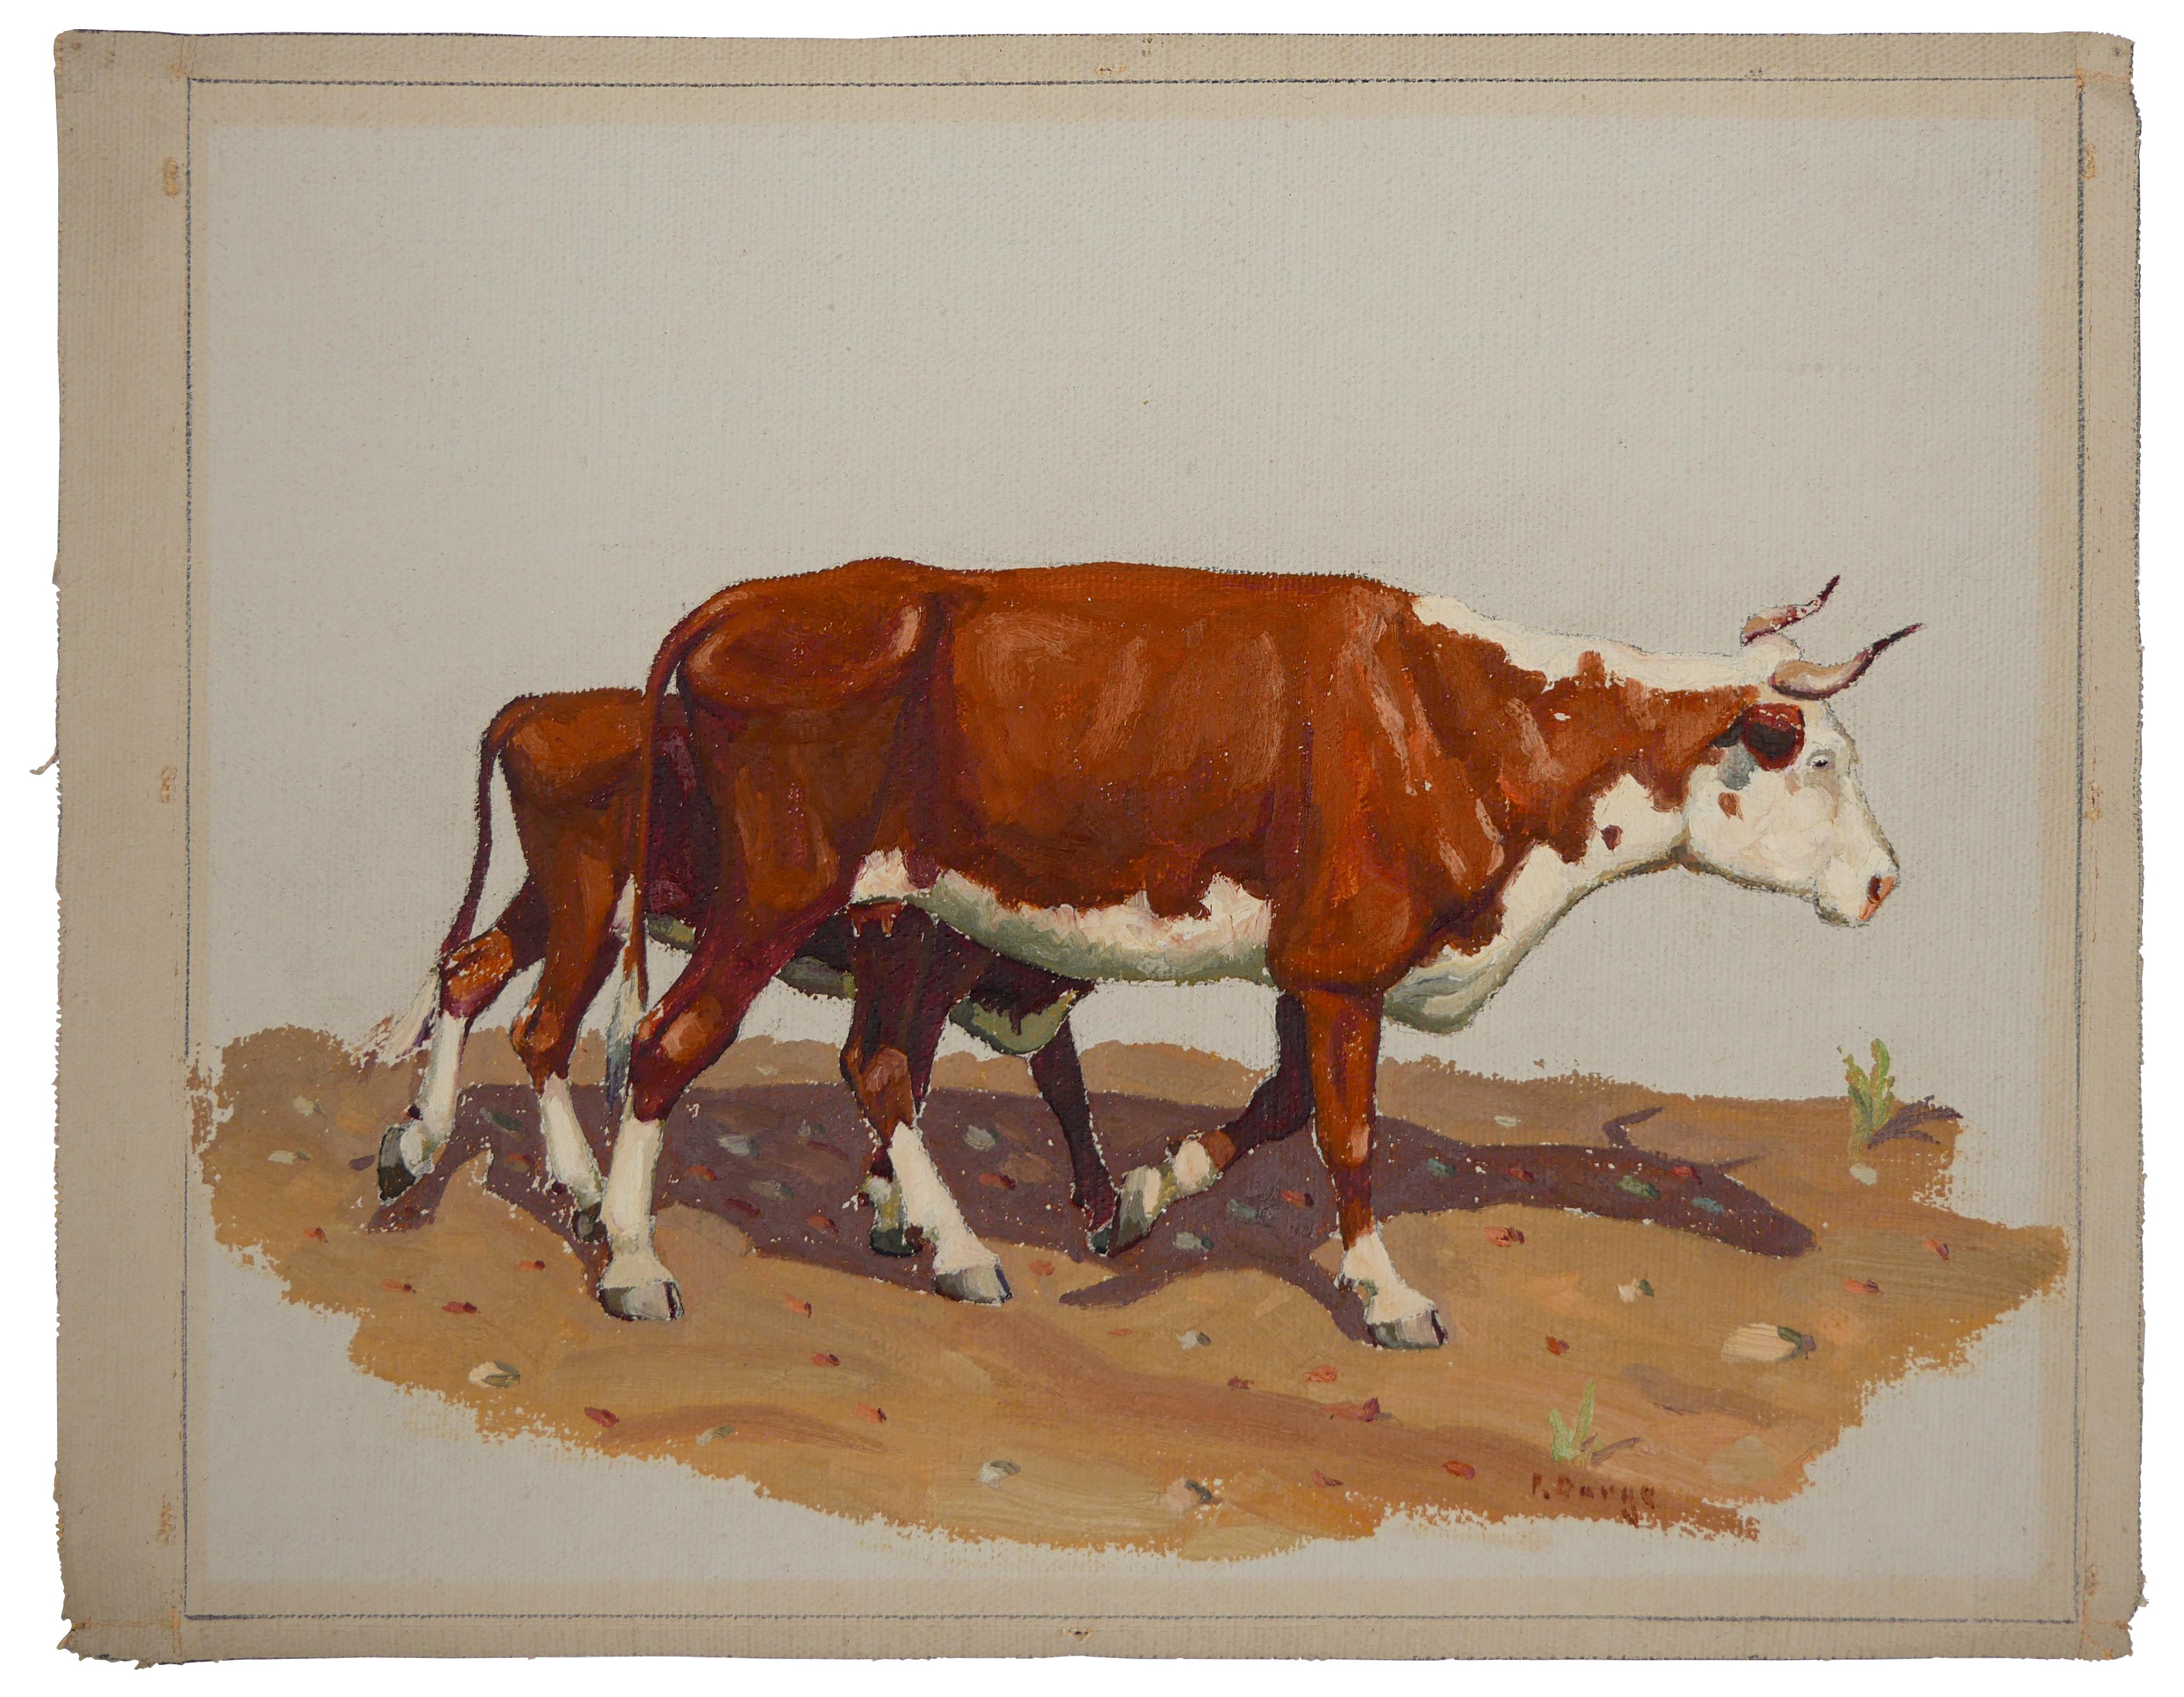 Fred Darge Animal Painting - "Cow and Calf" Brown and White Abstract Impressionist Painting of Cows